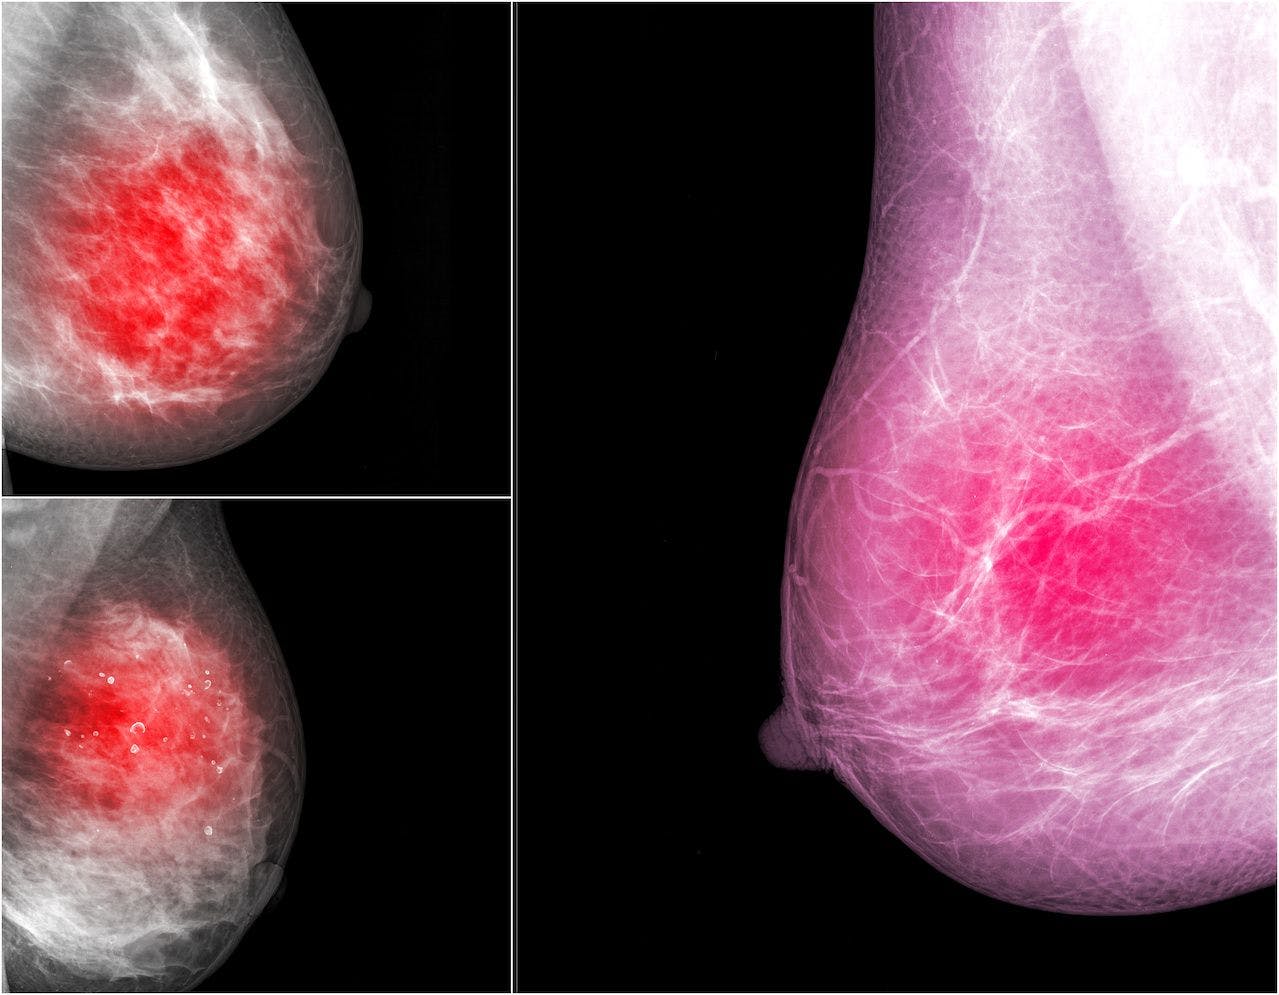 AB MRI Shown to Improve Cancer Detection Rate in Women With Dense Breast Tissue